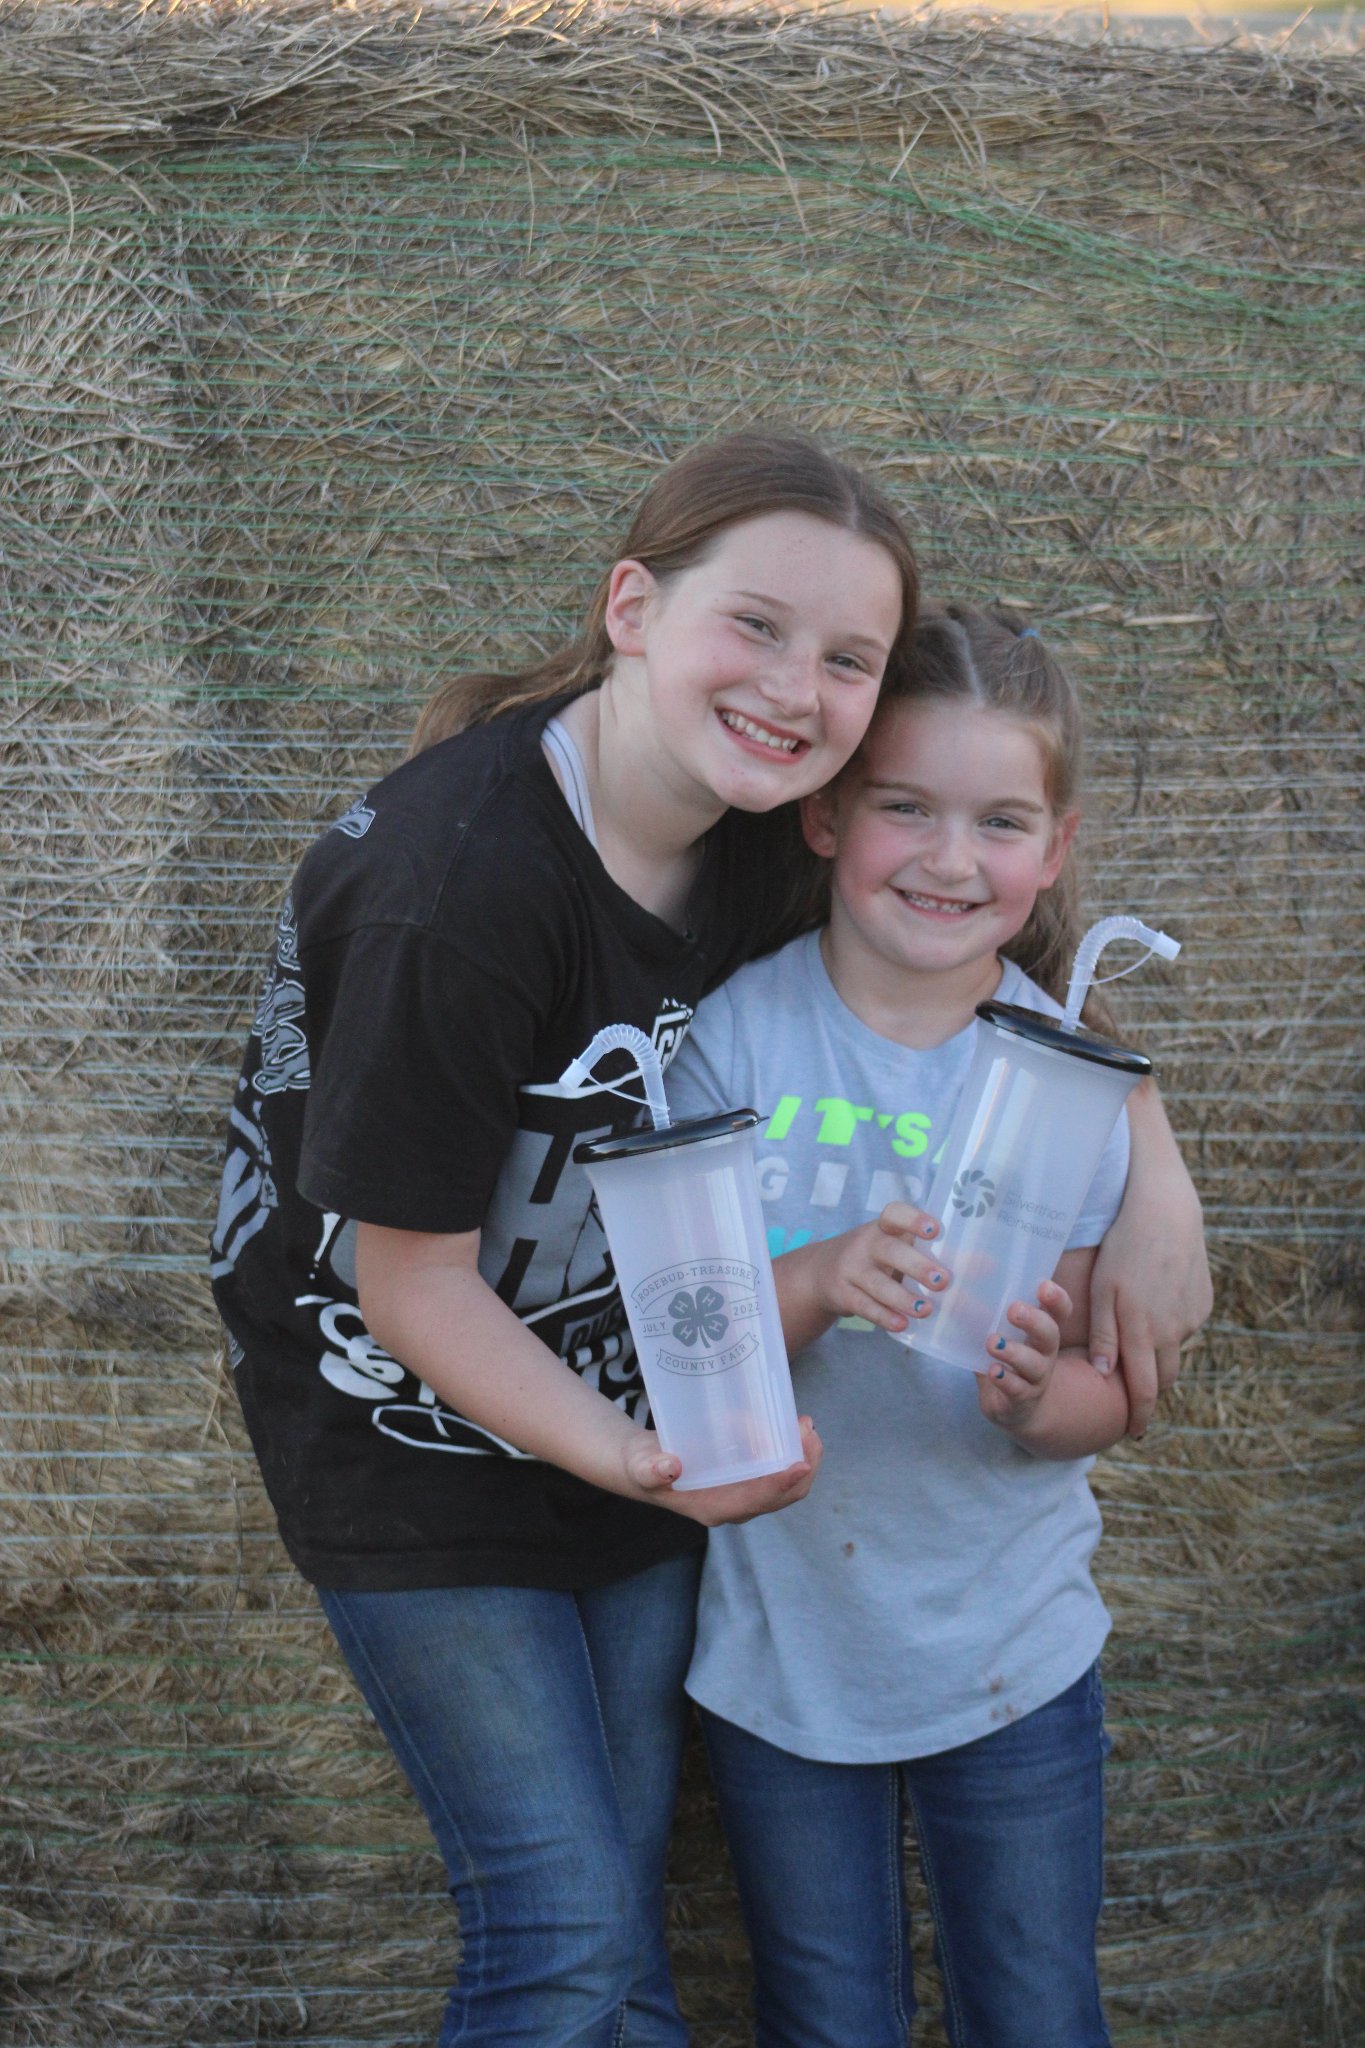 4-H'ers Showing off the annual fair cup